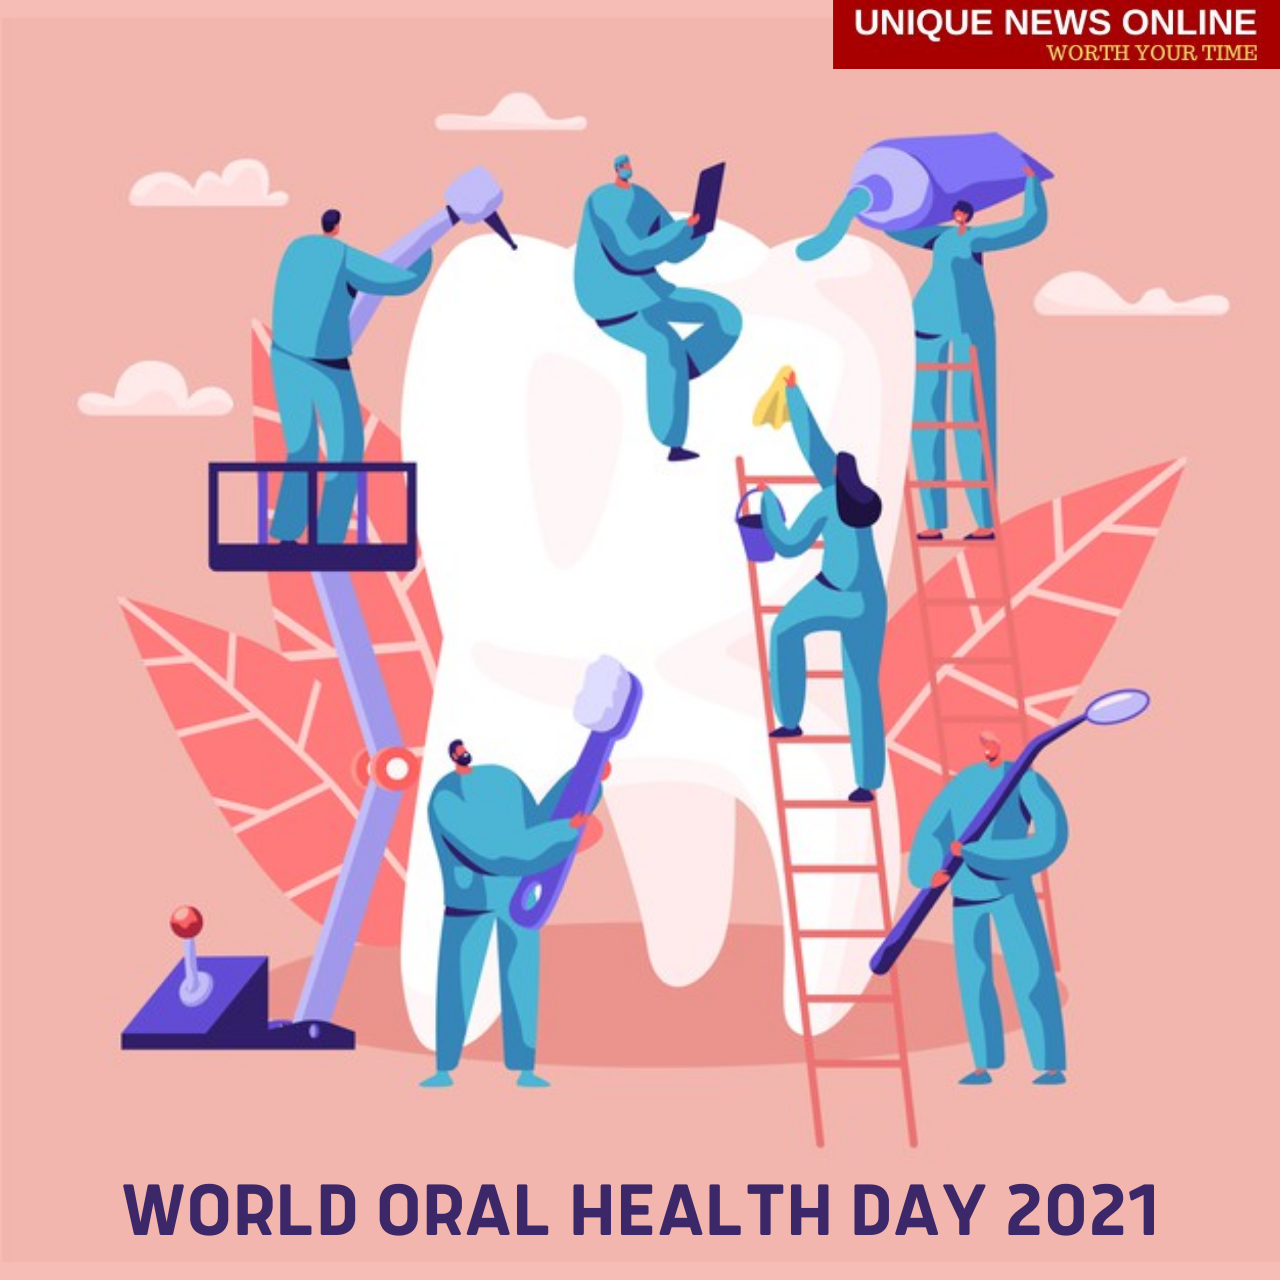 World Oral Health Day 2021 Wishes, Messages, Greetings, Quotes, and Images